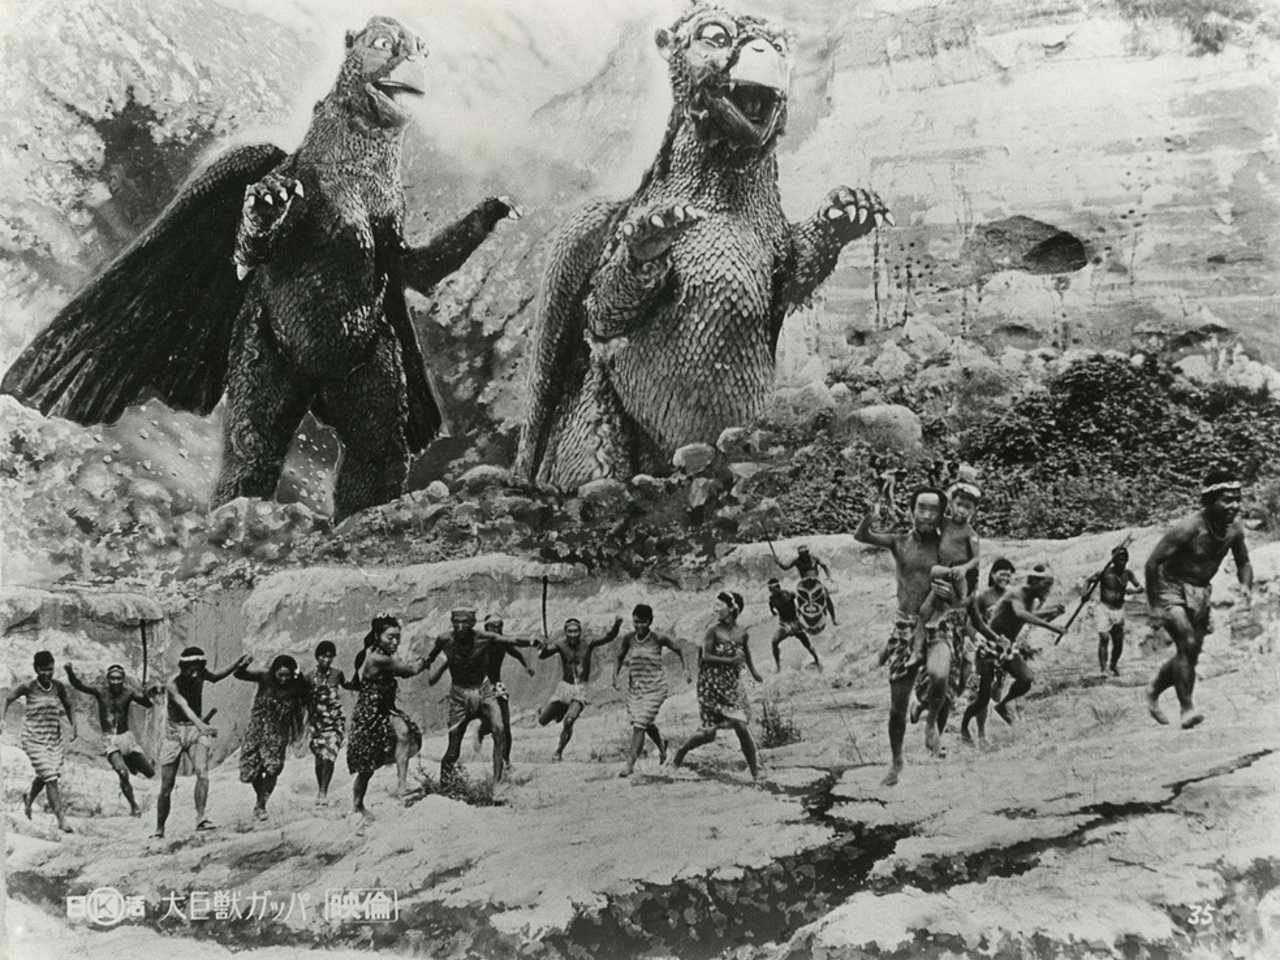 The natives flee from the Gappa monsters in Gappa the Triphibian Monster (1967)